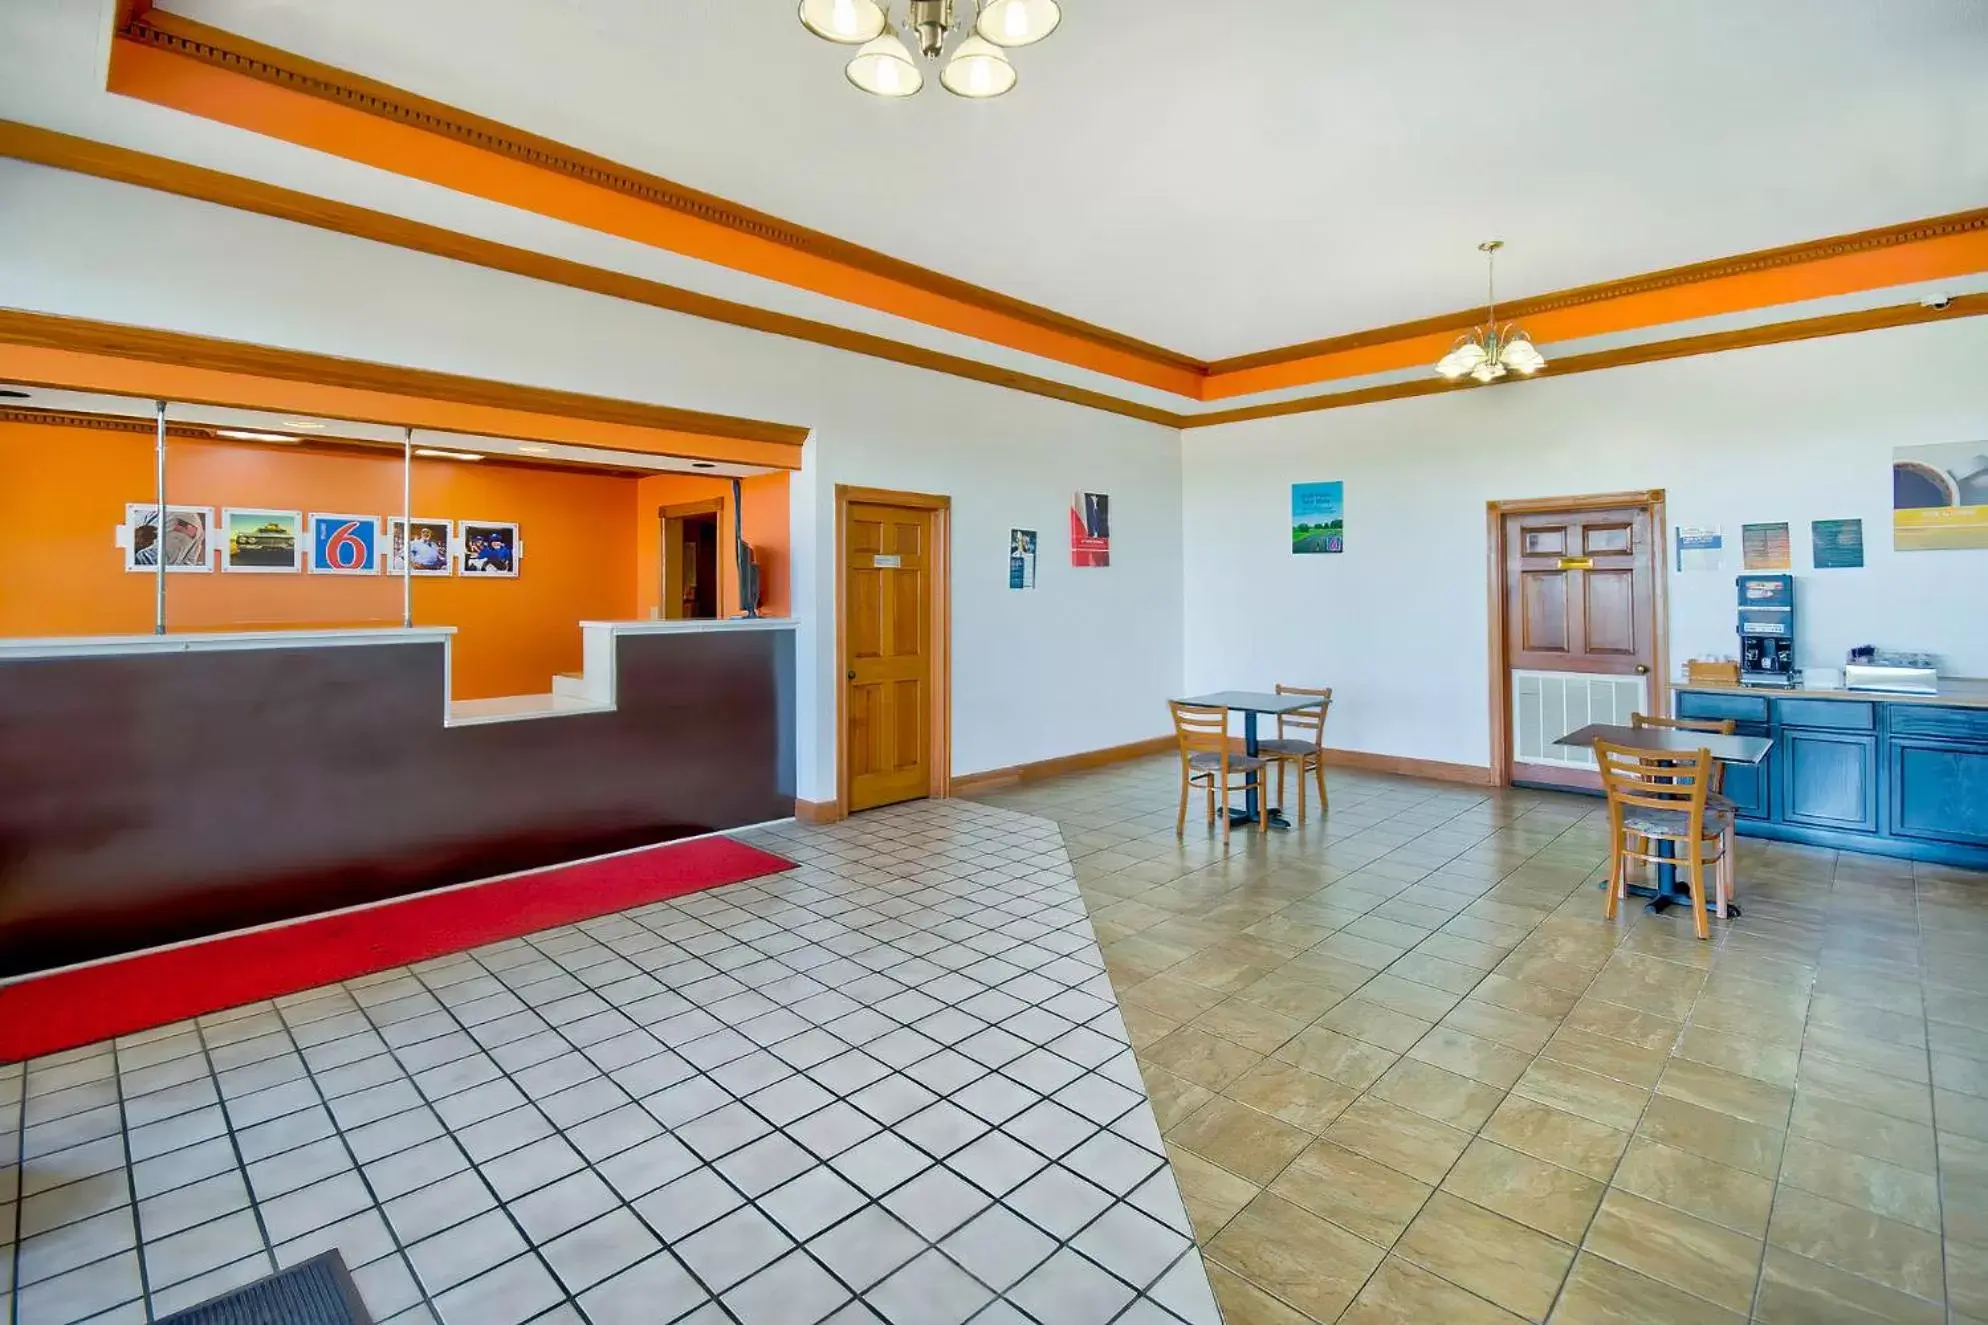 Lobby or reception in Motel 6-Grand Rivers, KY